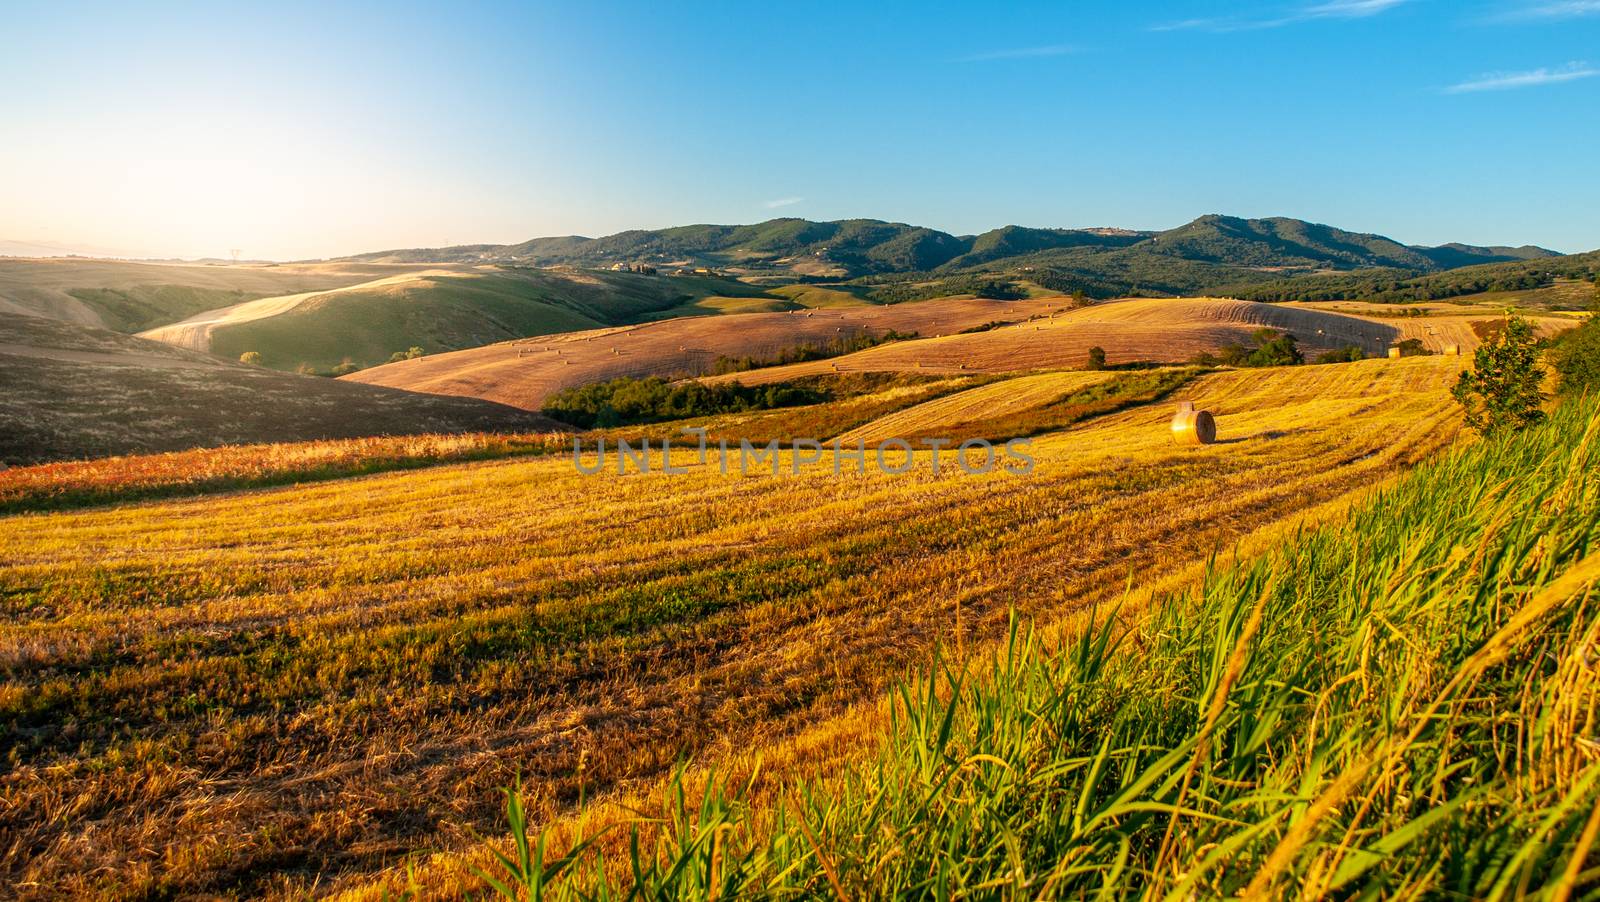 Evening in Tuscany. Hilly Tuscan landscape on sunny summer evening.